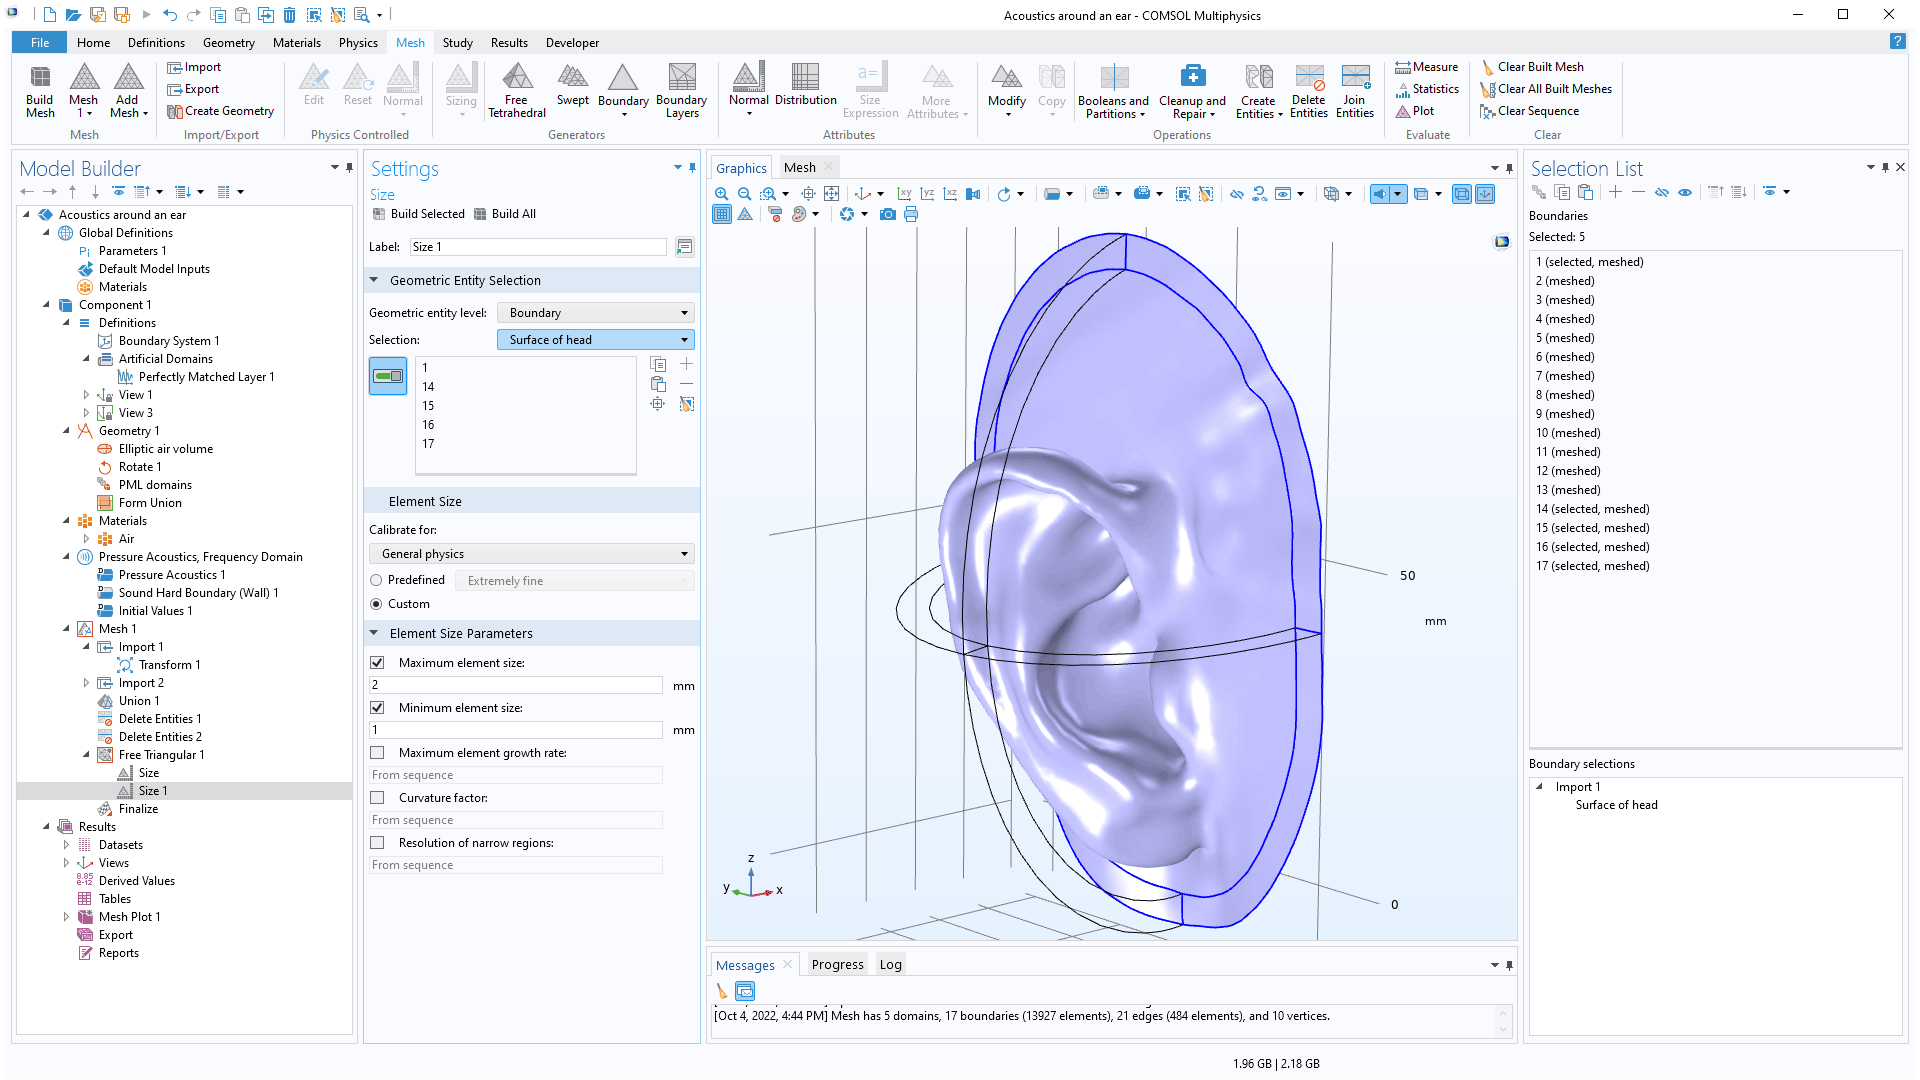 The COMSOL Multiphysics UI showing the Model Builder with the Size node selected, the corresponding Settings window, the Graphics window with an ear geometry, and the Selection List window.